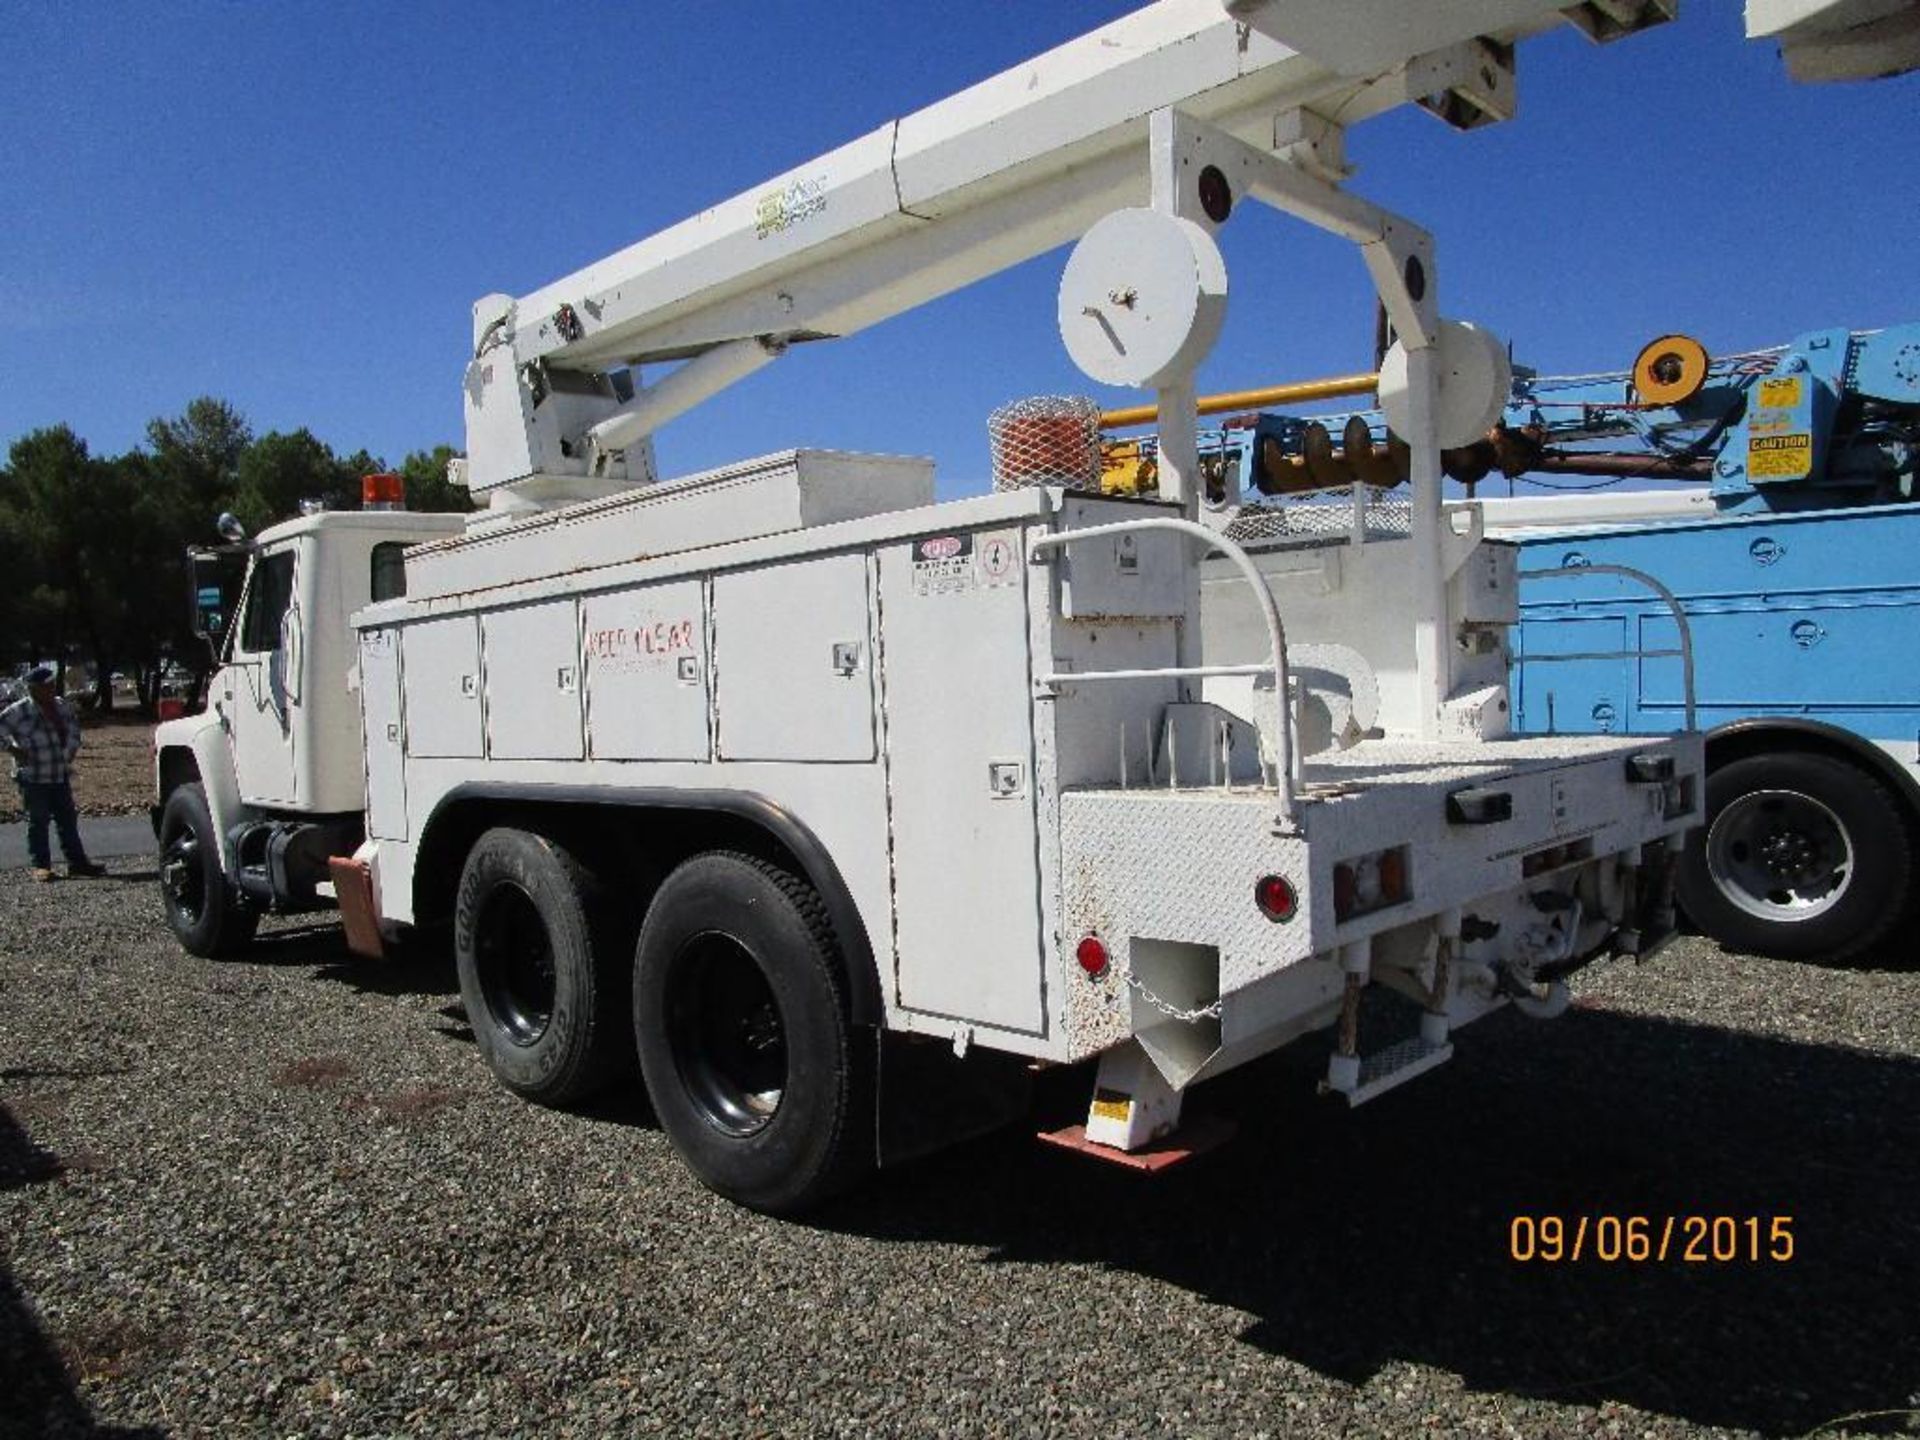 VIN 1HTLKTVR4FHA48391 LIC  20,000lb capacity with upper controls 62842 miles air brakes - Image 10 of 18